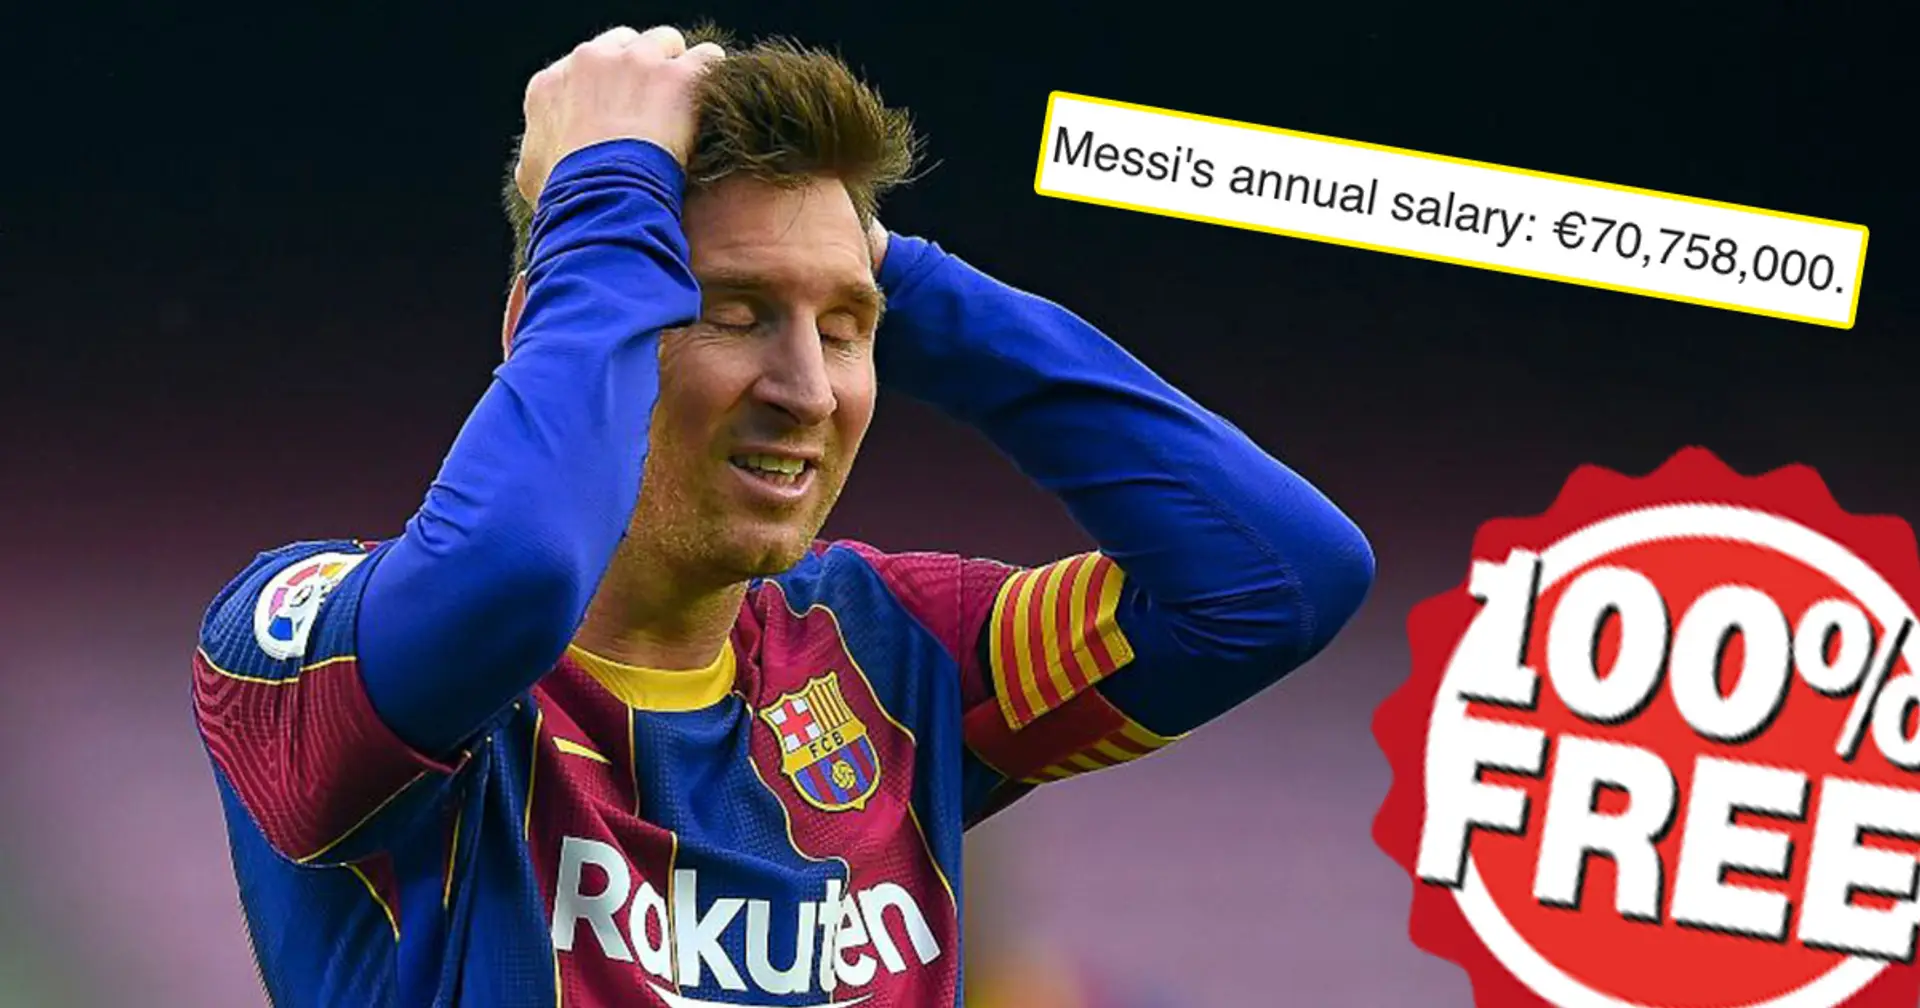 If Messi played for Barca for free, would it solve the crisis? You asked, we answered